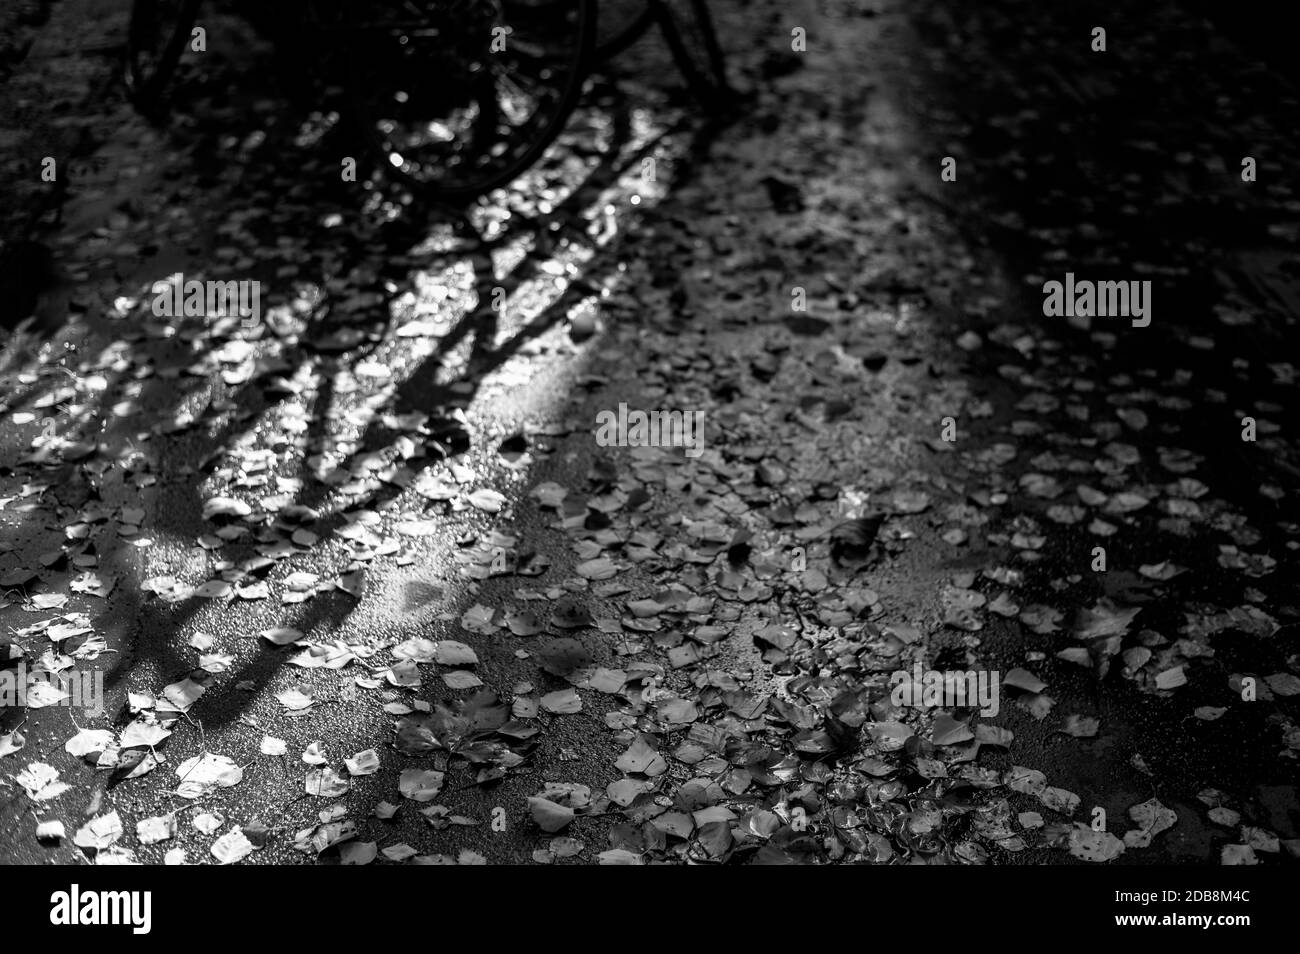 black and white monochrome image looking down at yellow autumn leaves scattered on a wet pavement with shadow cast of bikes Stock Photo